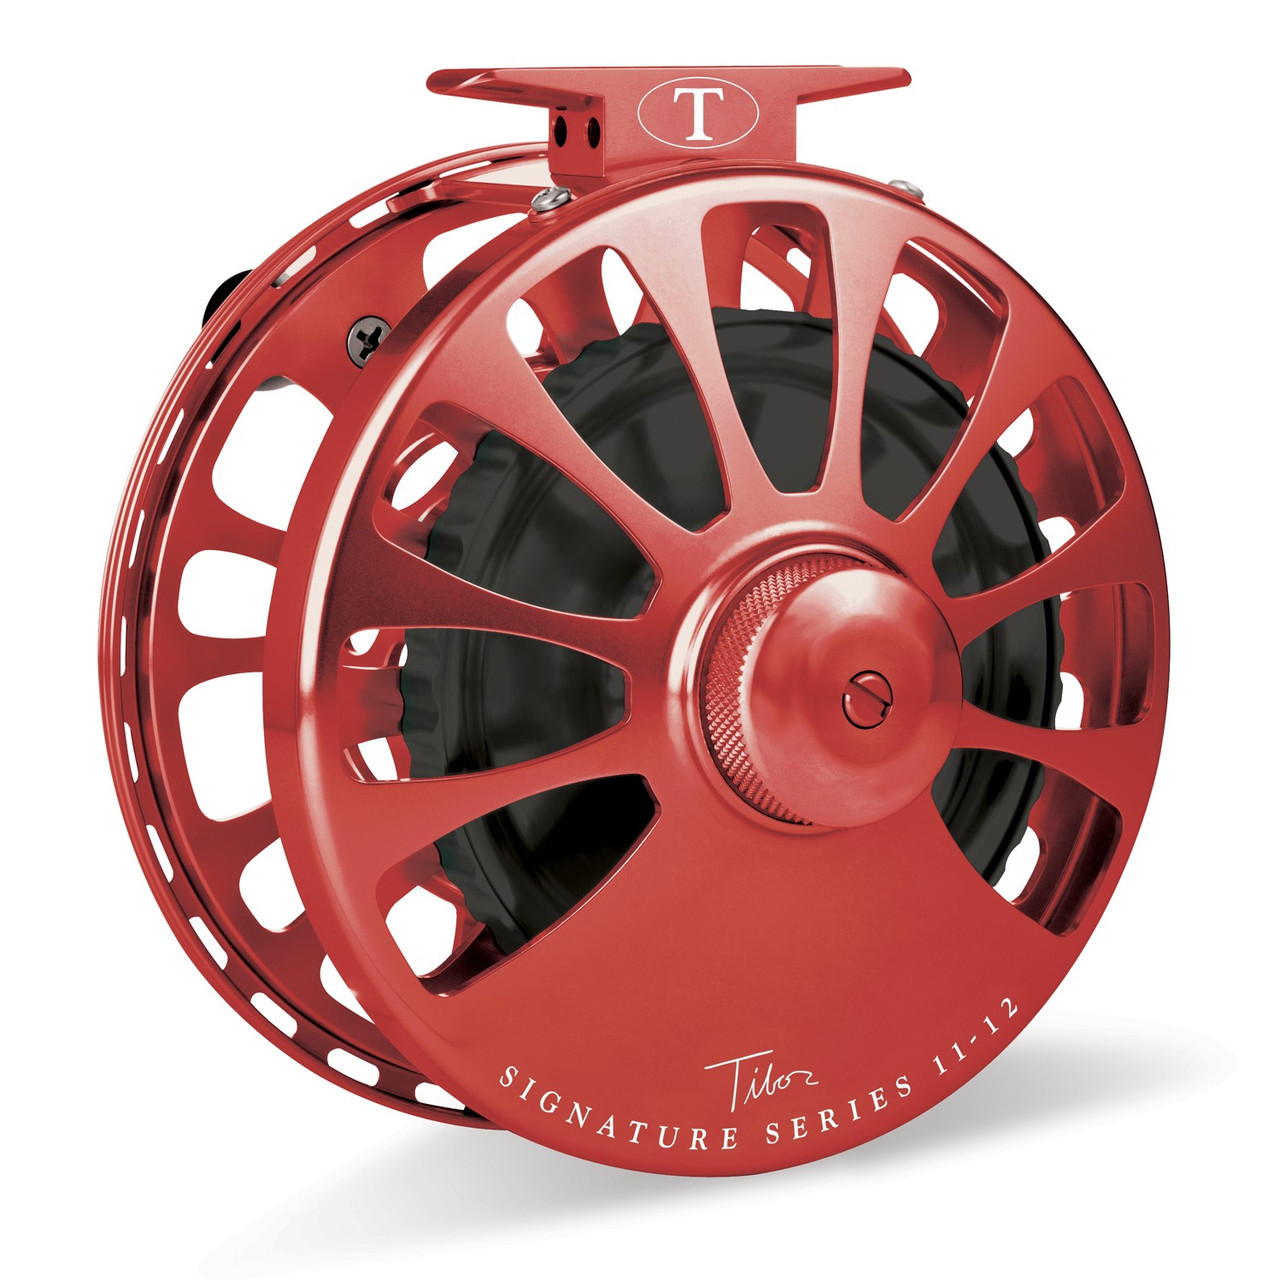 Signature Series 11-12wt Red Reel with Black Hub33590 - Gordy